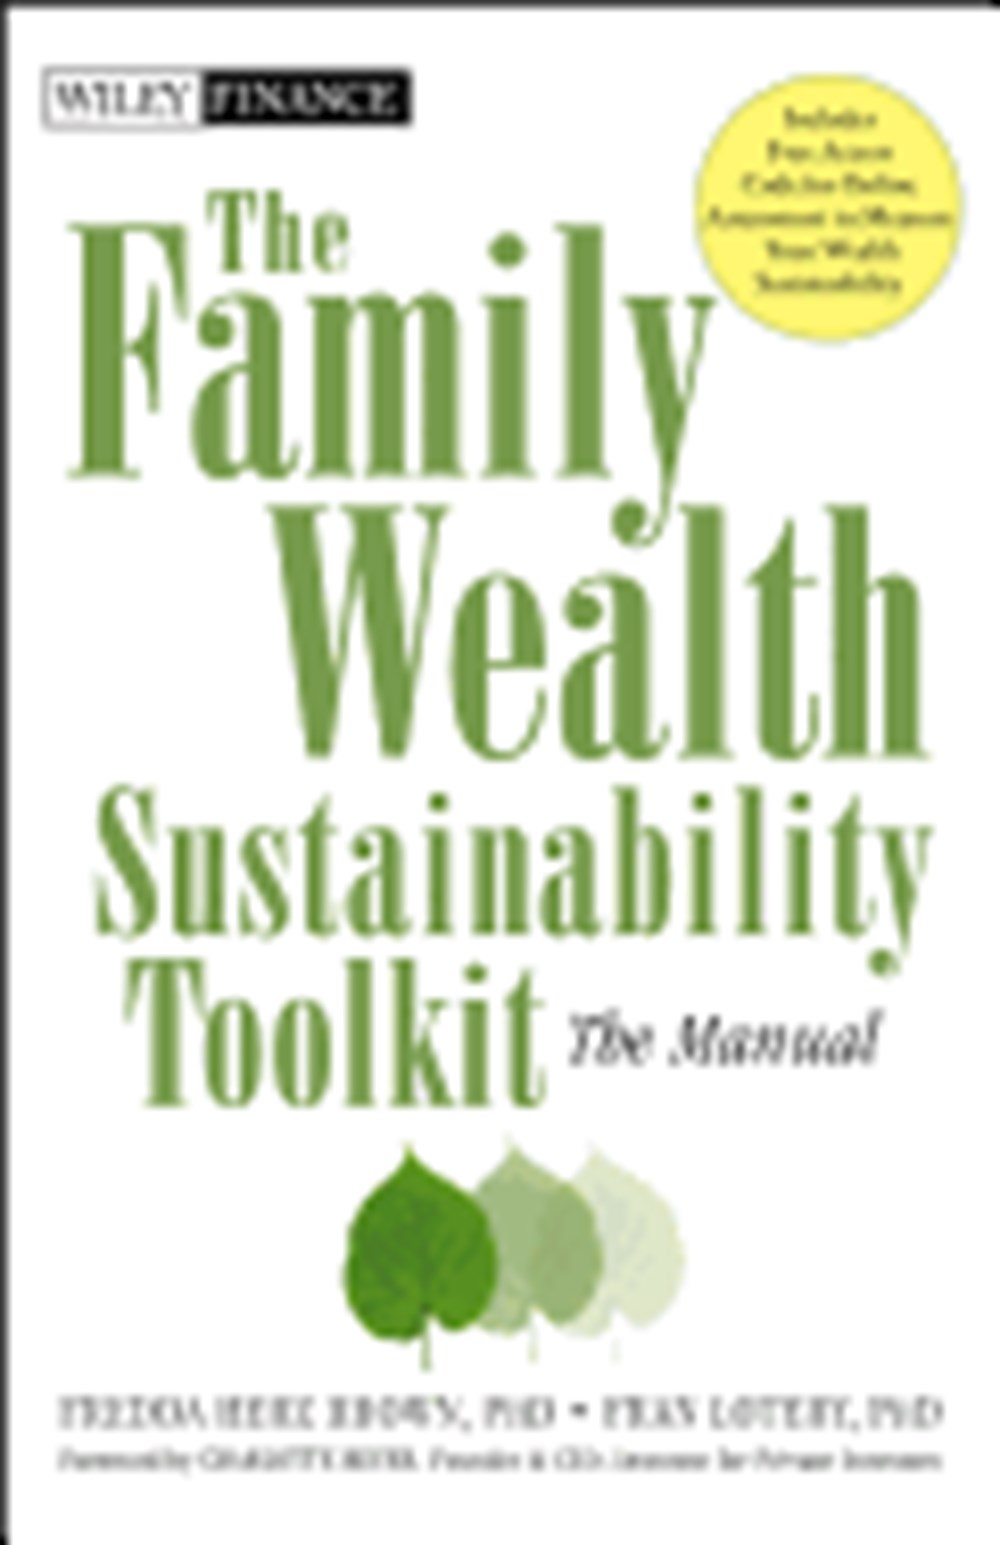 Family Wealth Sustainability Toolkit: The Manual [With CDROM and Free Web Access]